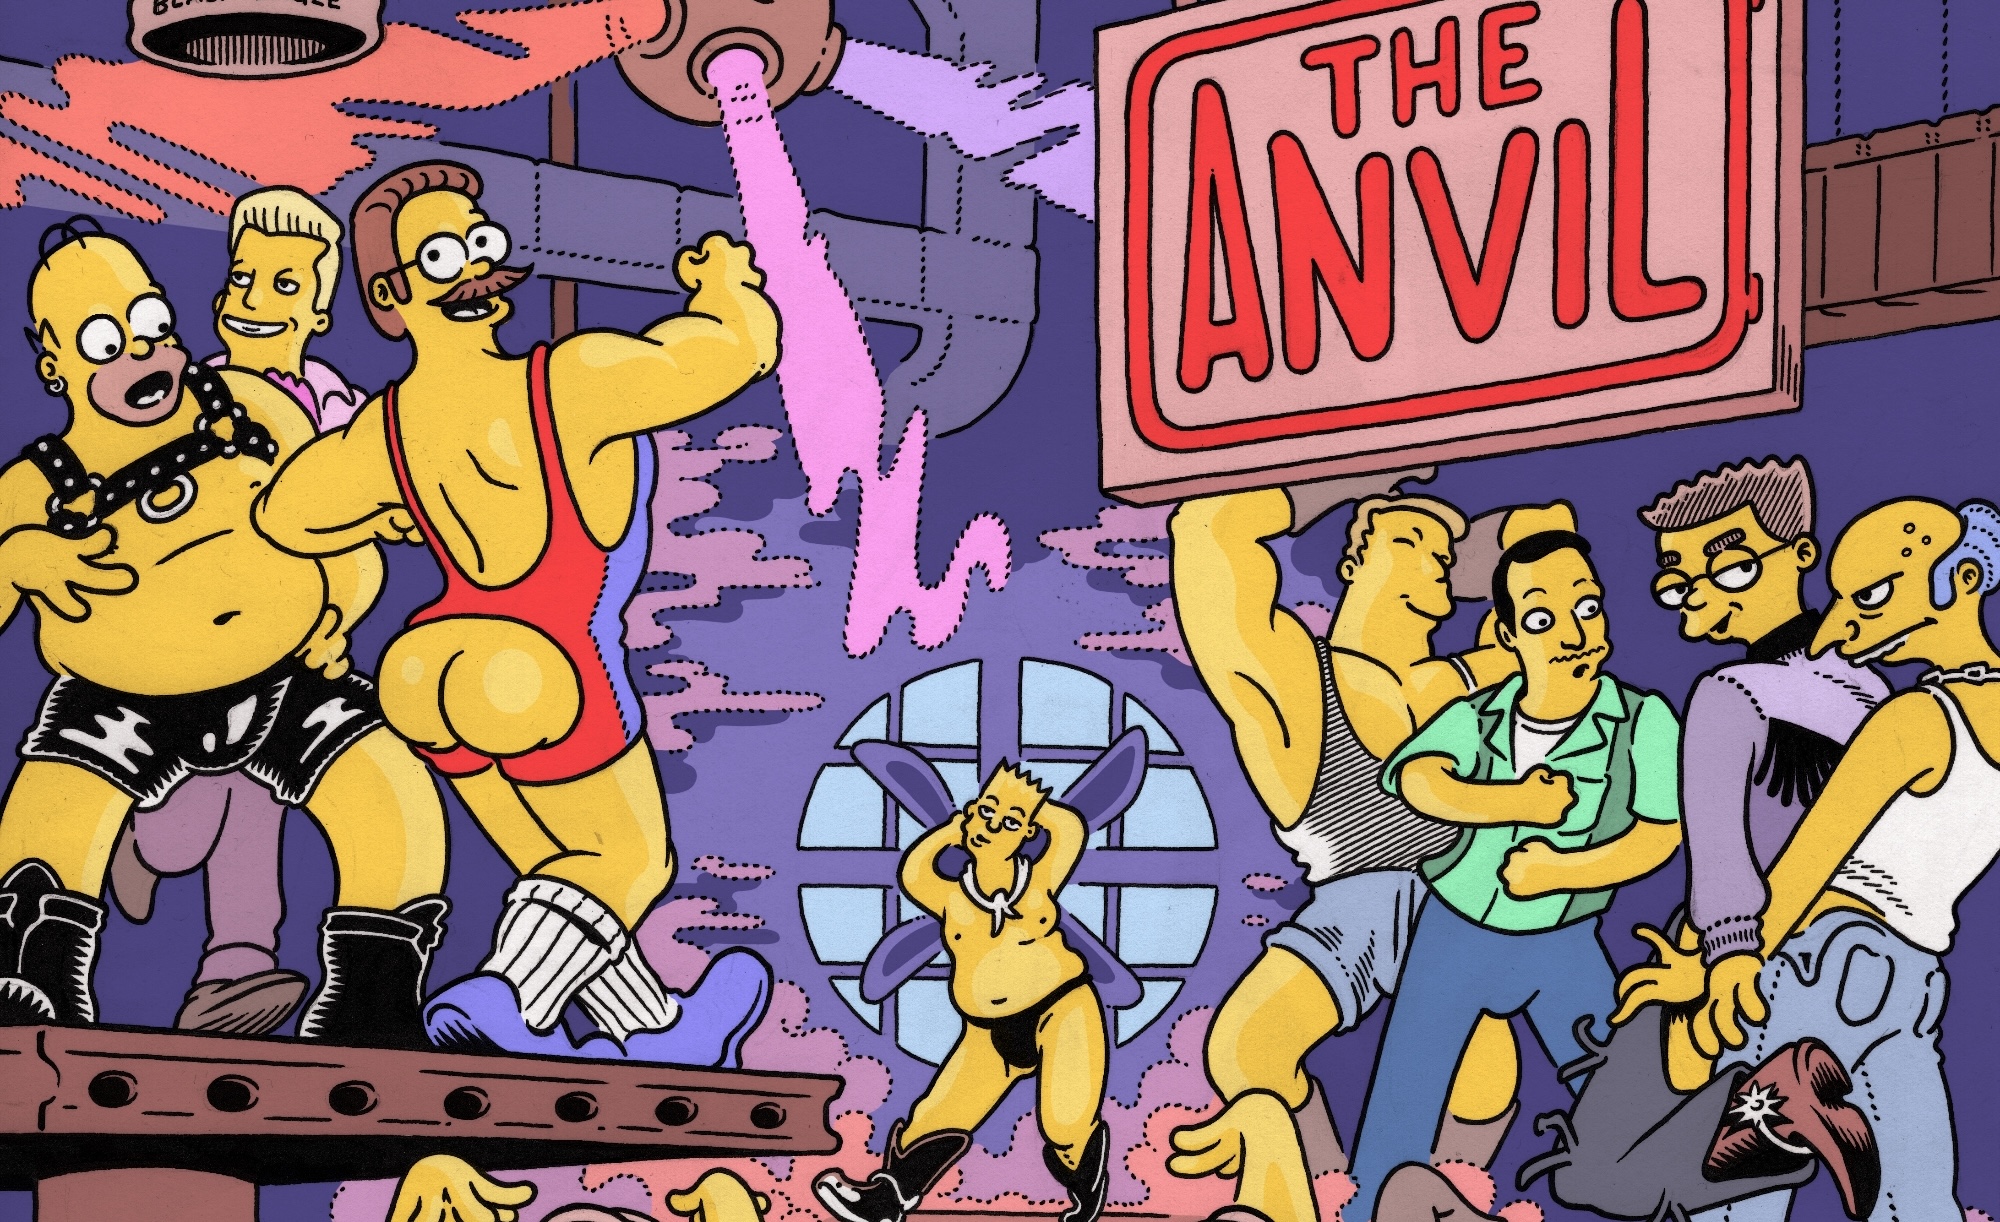 Characters from The Simpsons at a gay nightclub. A sign reads "The Anvil." On the left, Homer wears a harness and stares at Ned Flanders, wearing a snowsuit with the butt cut out. Behind him is Karl. On the right, Waylon Smithers dances with Mr. Burns while John and Rainier Wolfcastle dance around them. In the background, Bart dances in front of a fan in a a bolo tie, cowboy boots, and a thong.